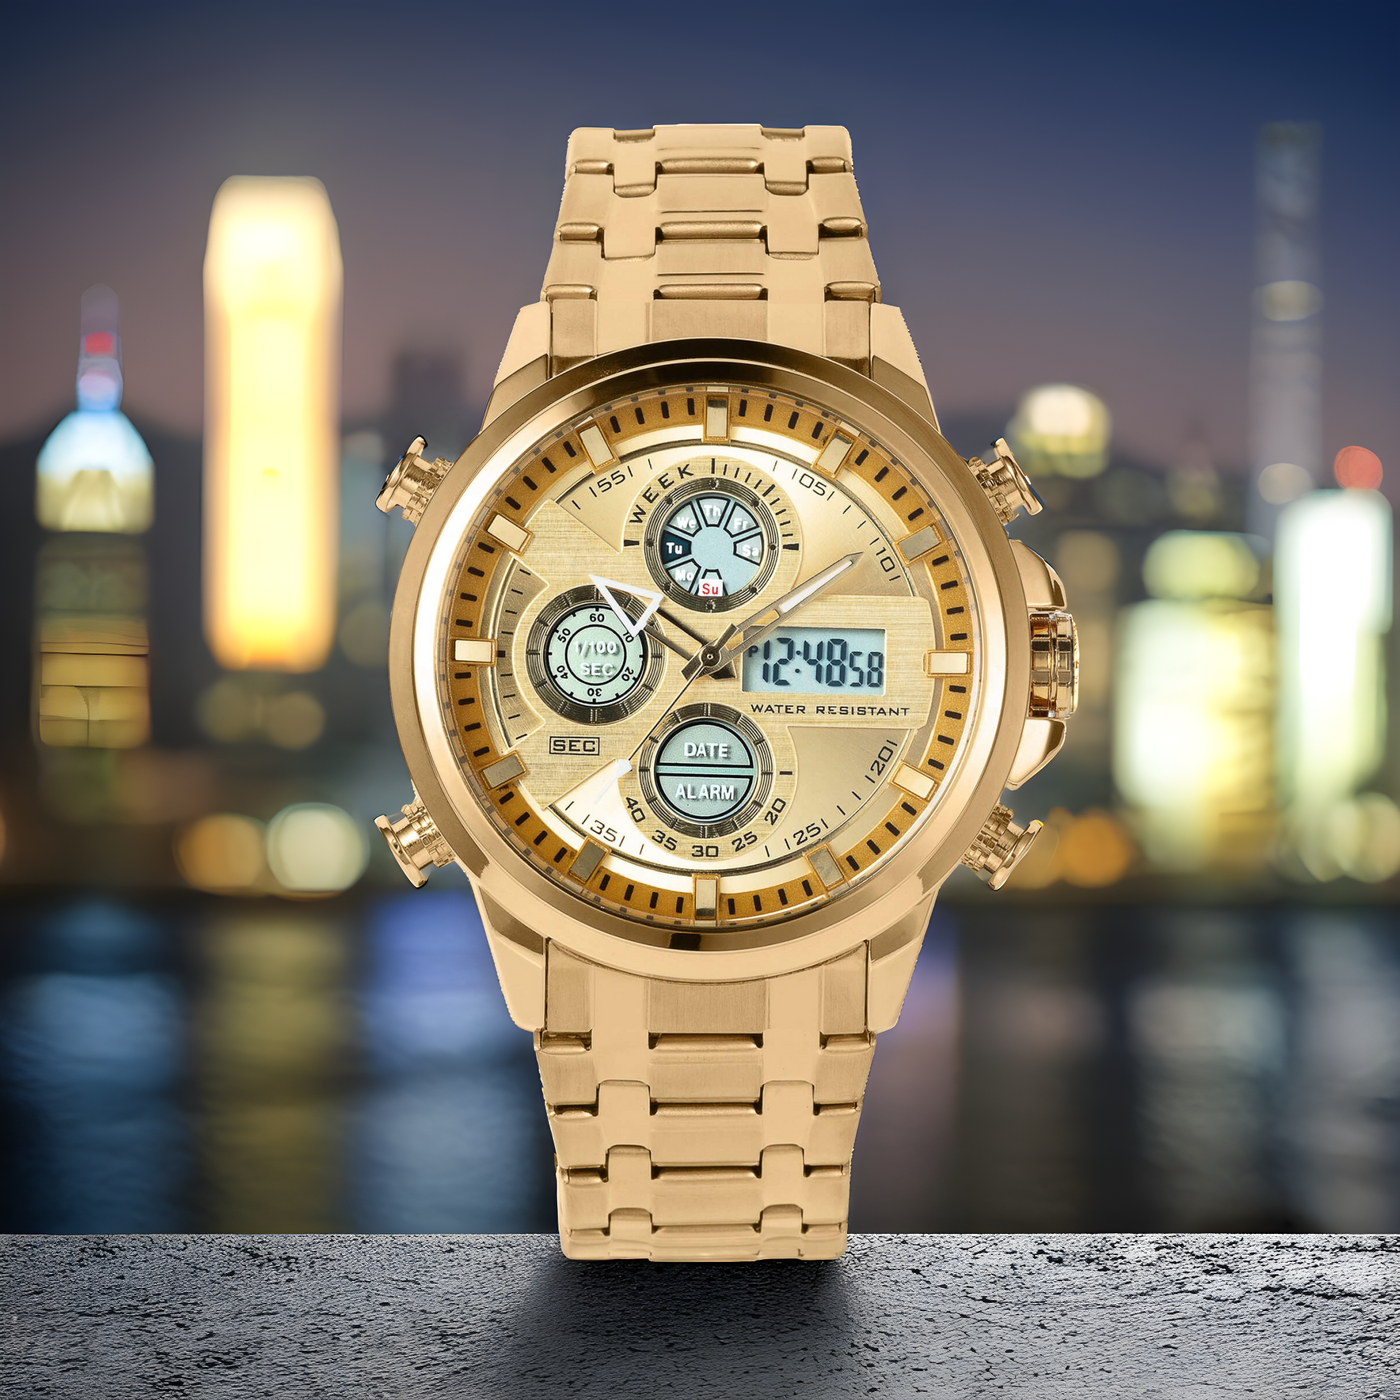 Gold watch on city background